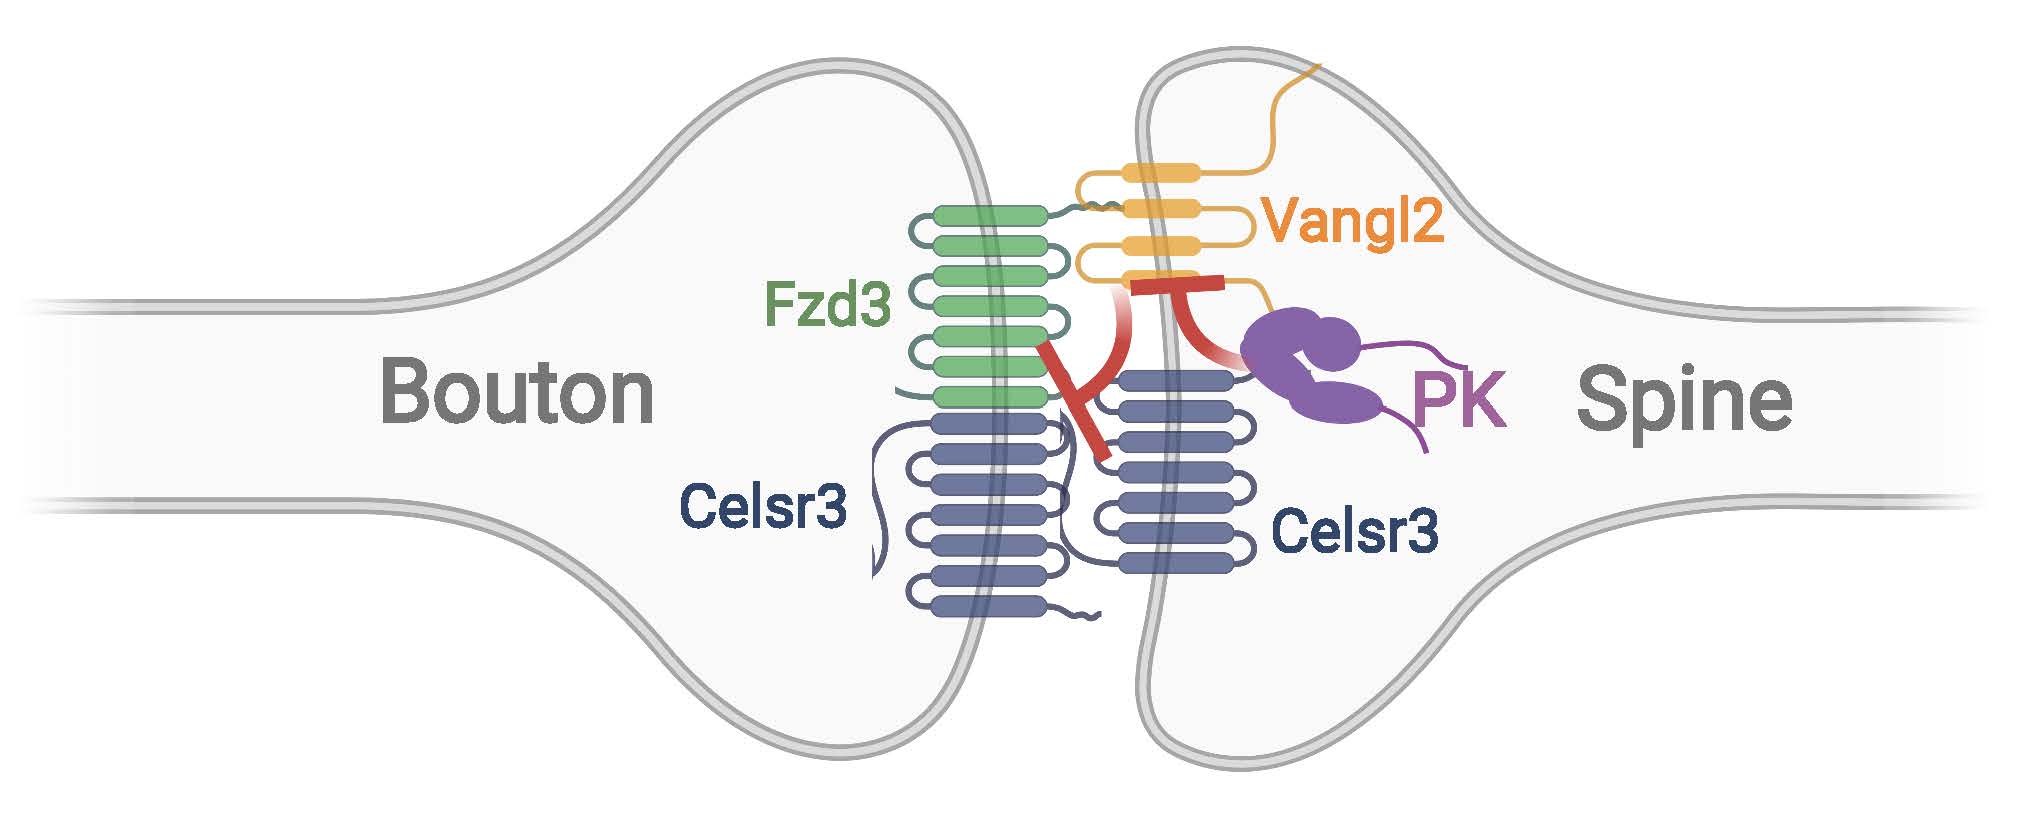 Image shows the localization and function of PCP proteins in regulating synapse numbers. Vangl2 causes synapse disassembly and Prickle antagonizes Vangl2 and promotes synapse stability. Fzd3: Frizzled3; PK: Prickle.  